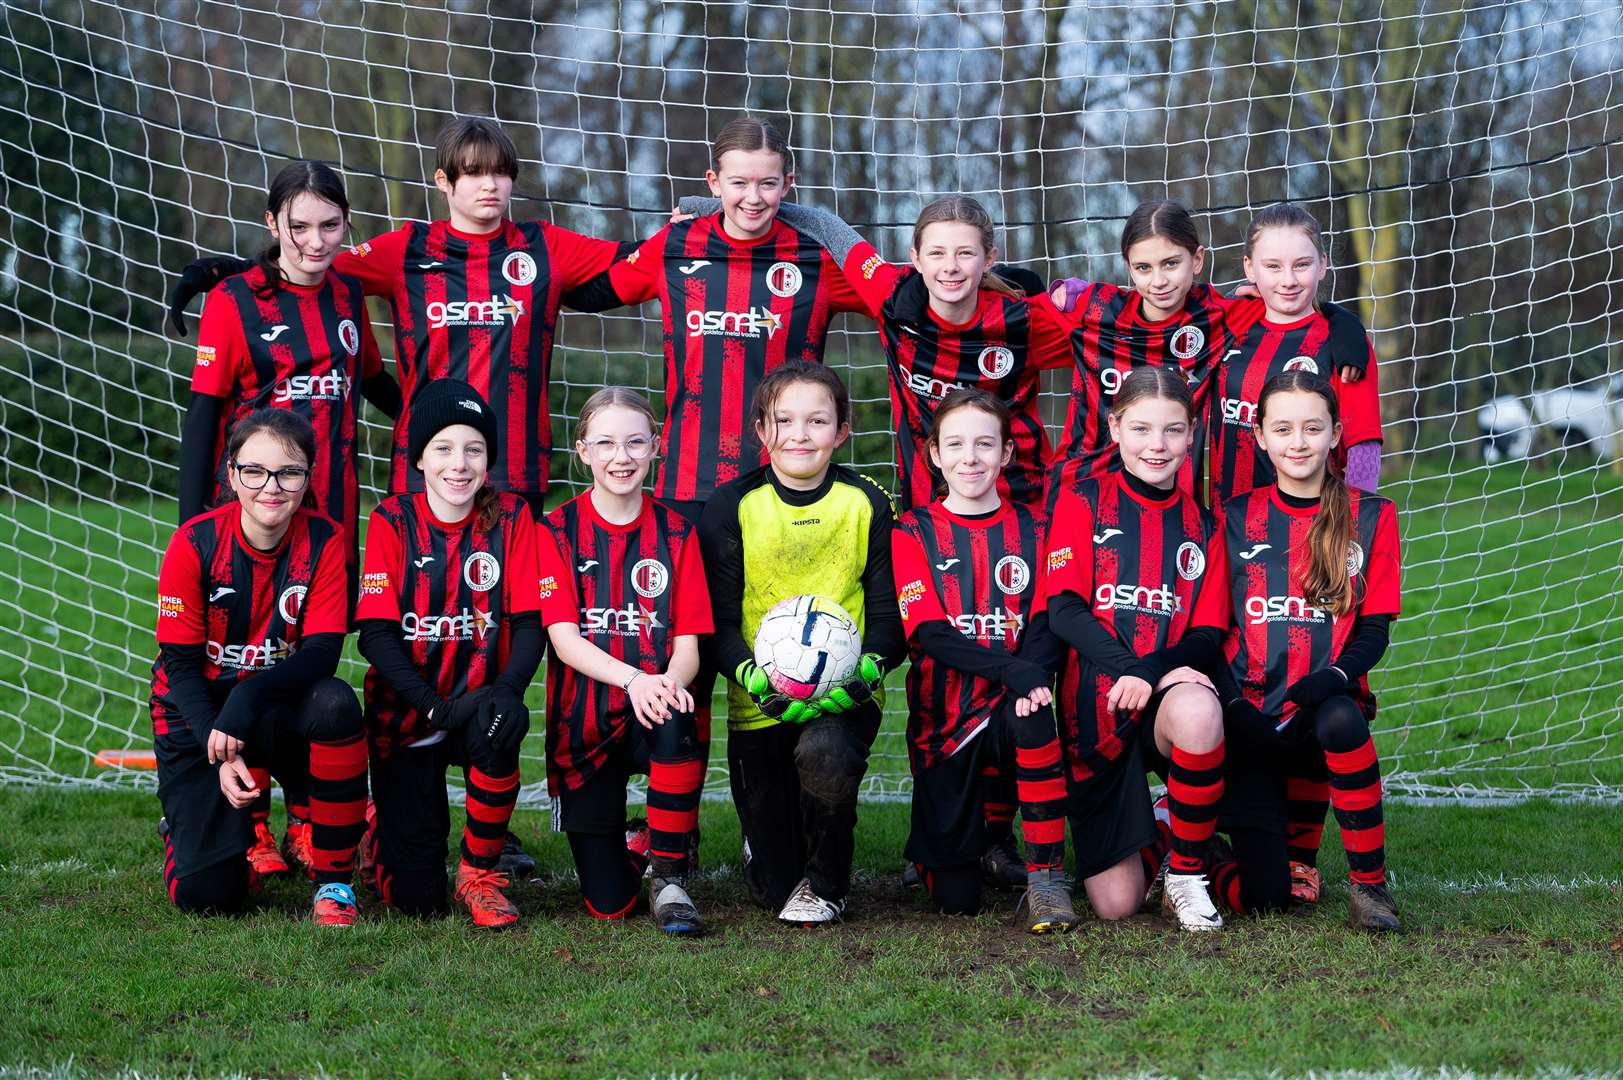 King's Lynn Soccer Club under-12 Lionesses in County Cup action against Sprowston. Picture: Ian Burt